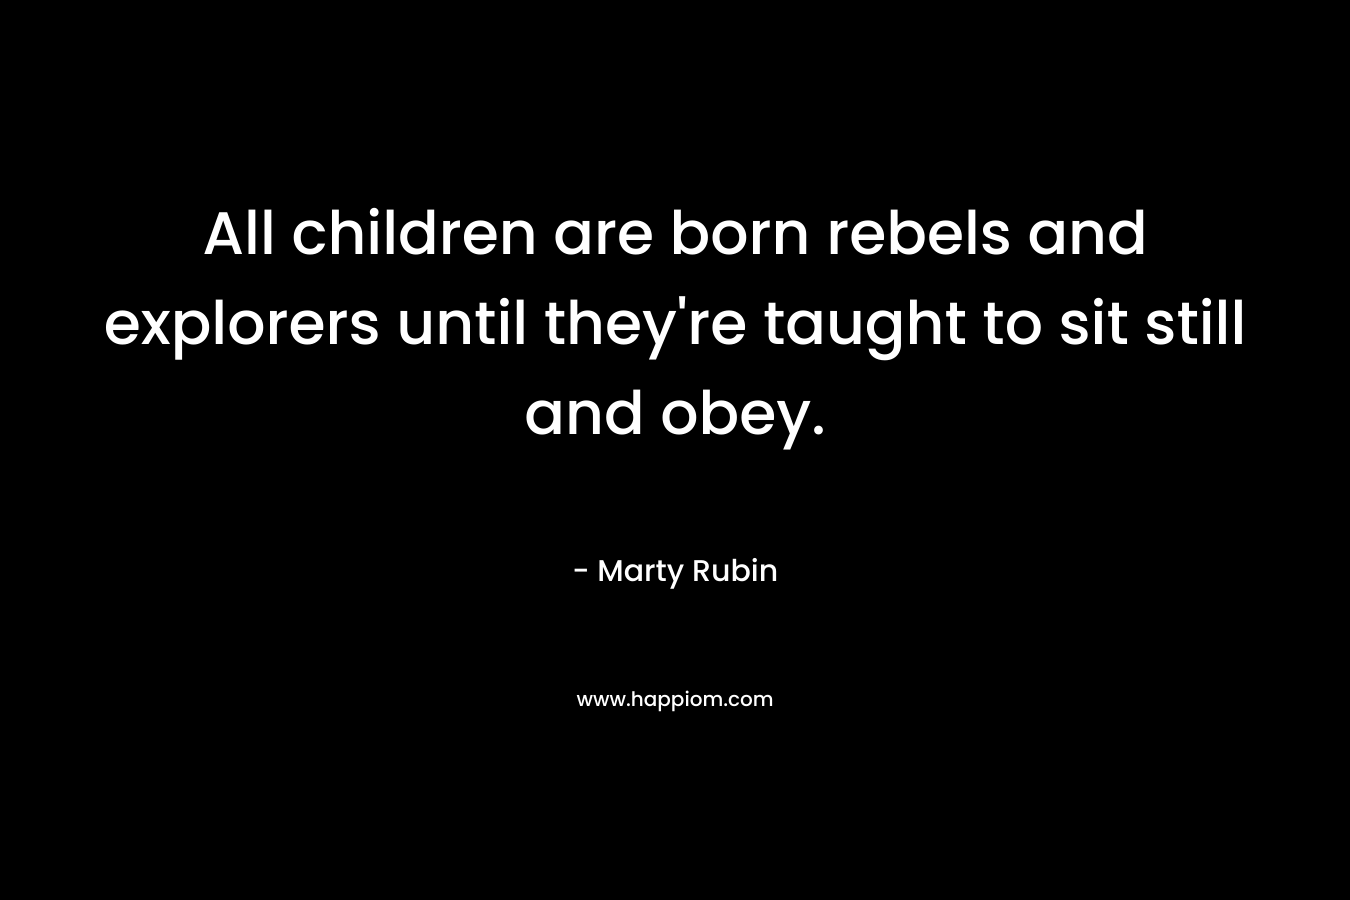 All children are born rebels and explorers until they’re taught to sit still and obey. – Marty Rubin